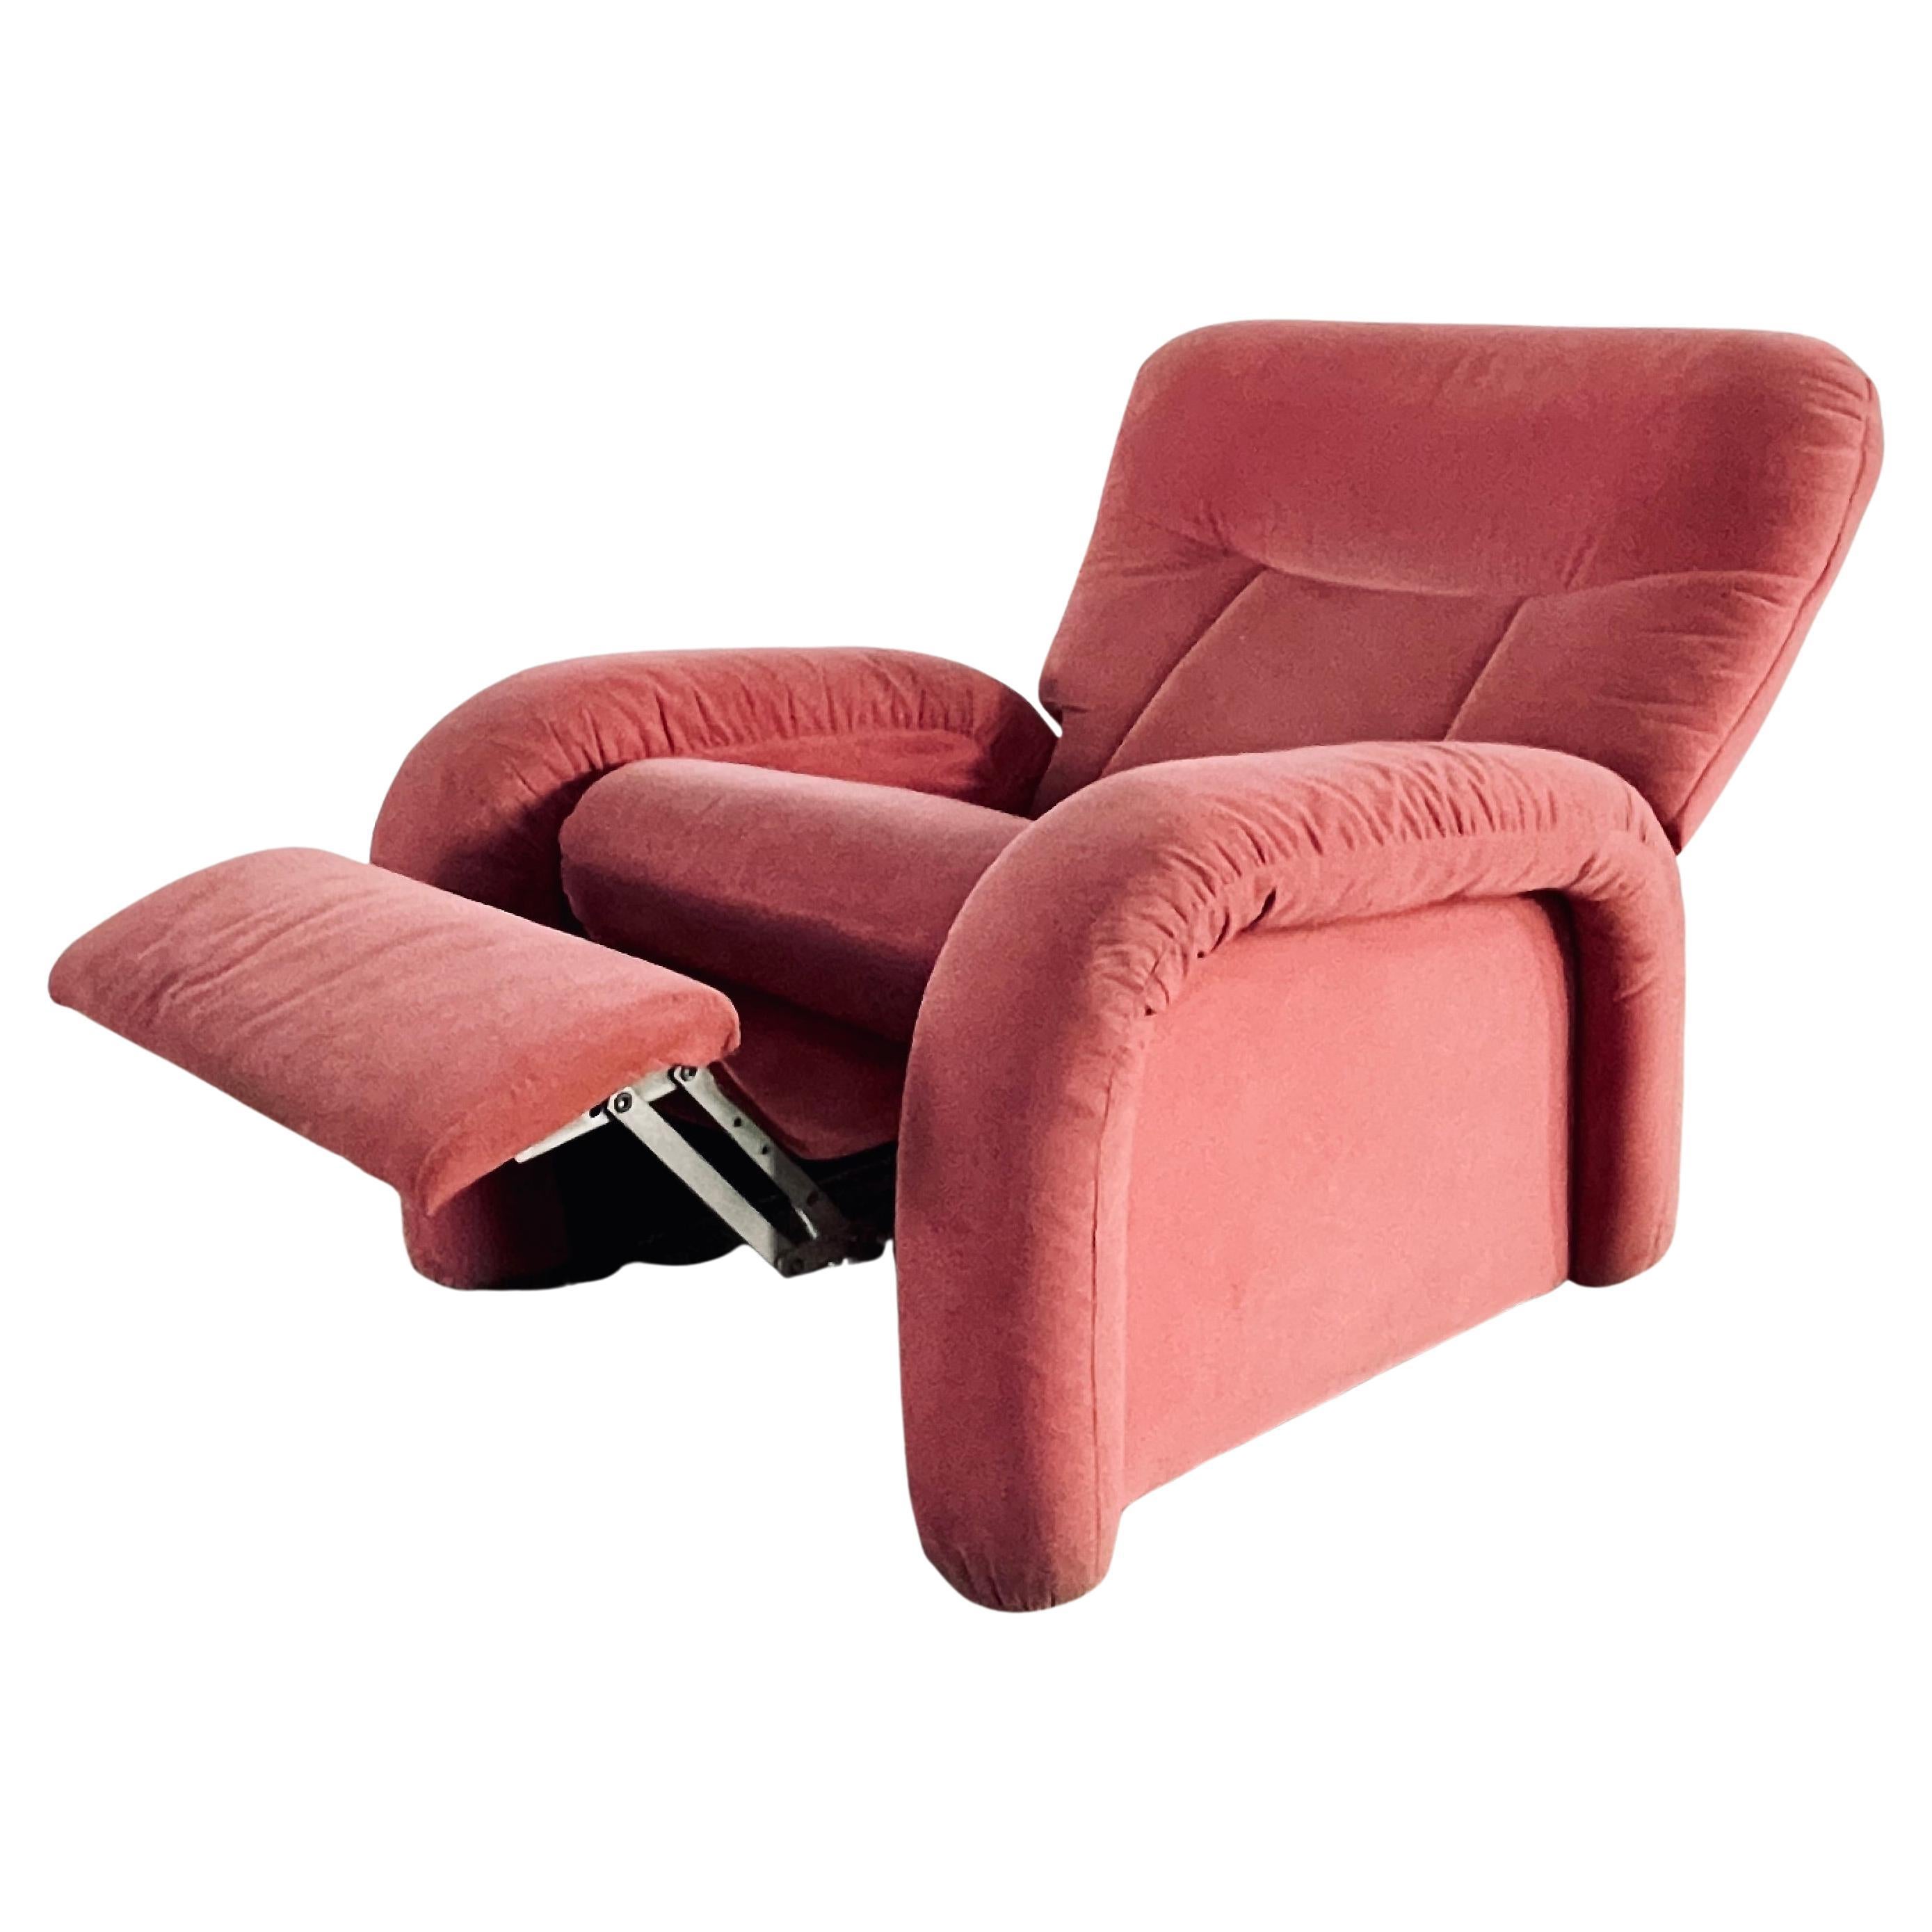 Vintage Italian Arch Reclining Lounge Chairs, Original Upholstery, Italy, 1950s For Sale